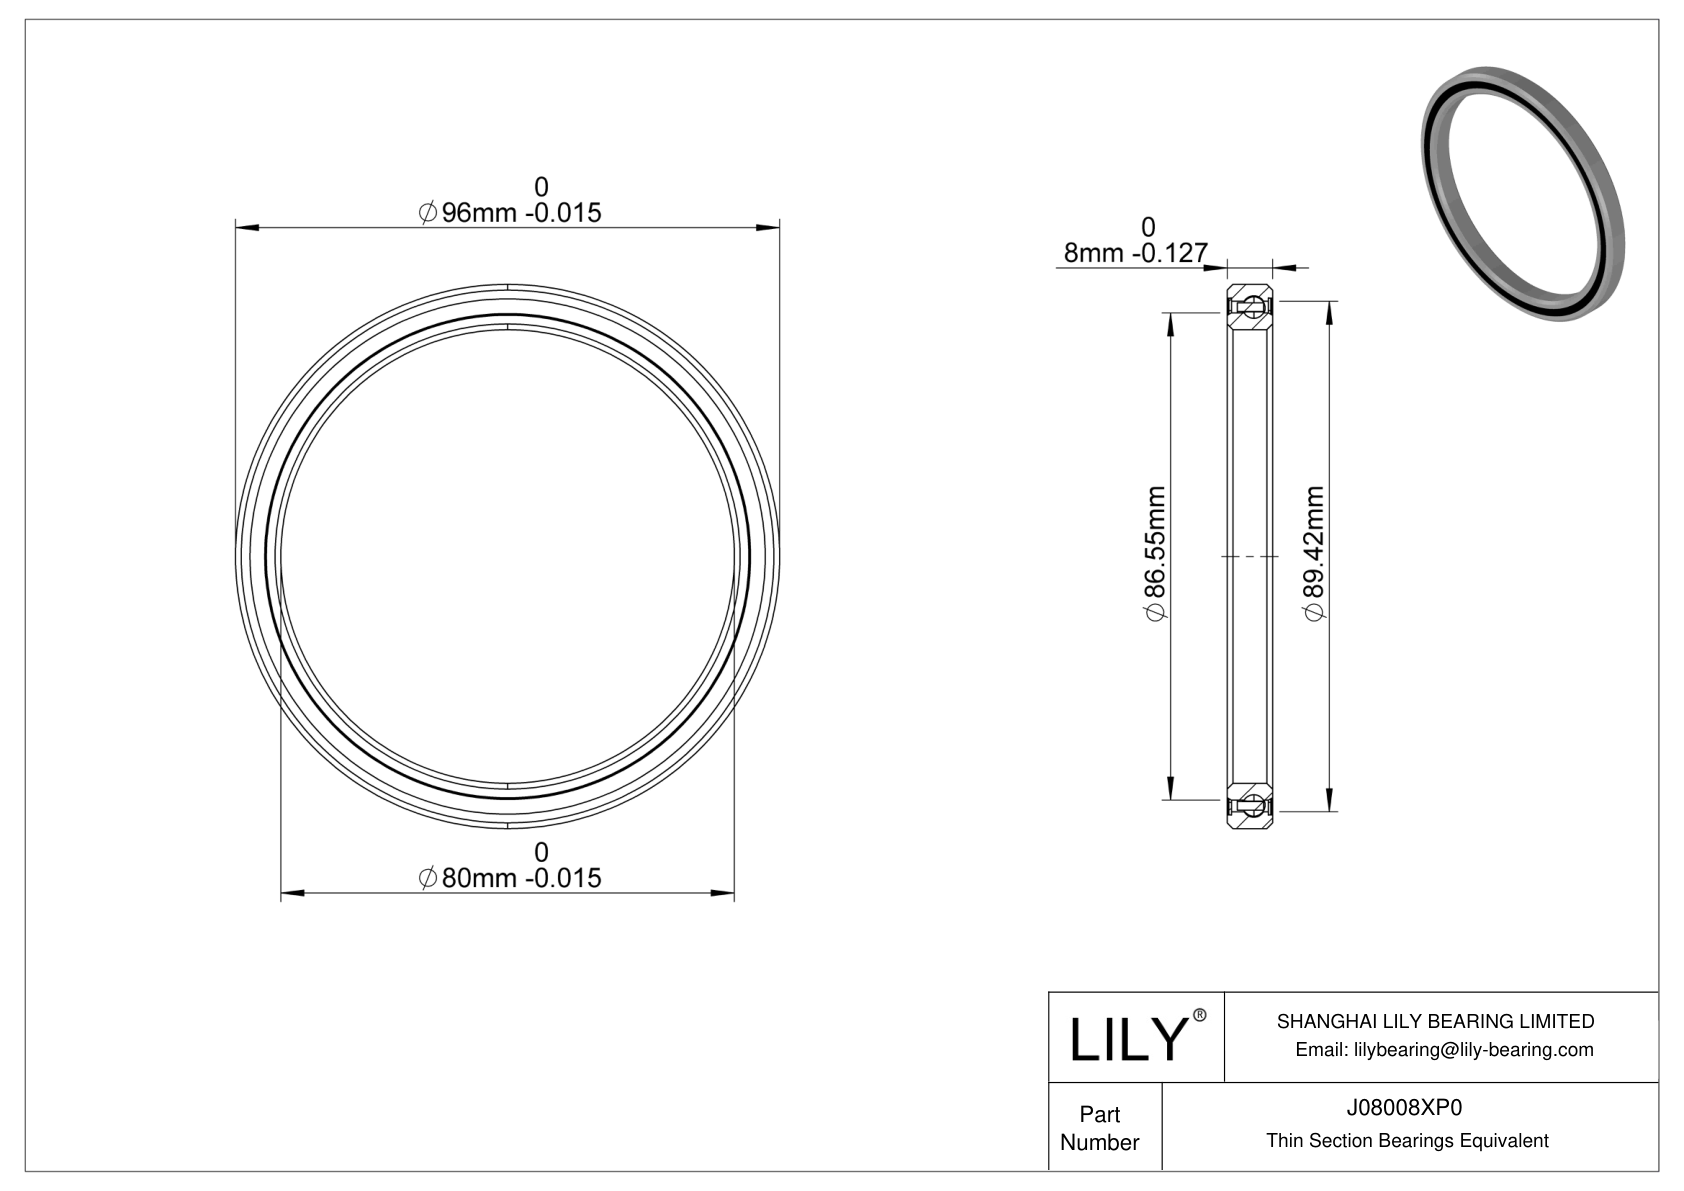 J08008XP0 Constant Section (CS) Bearings cad drawing